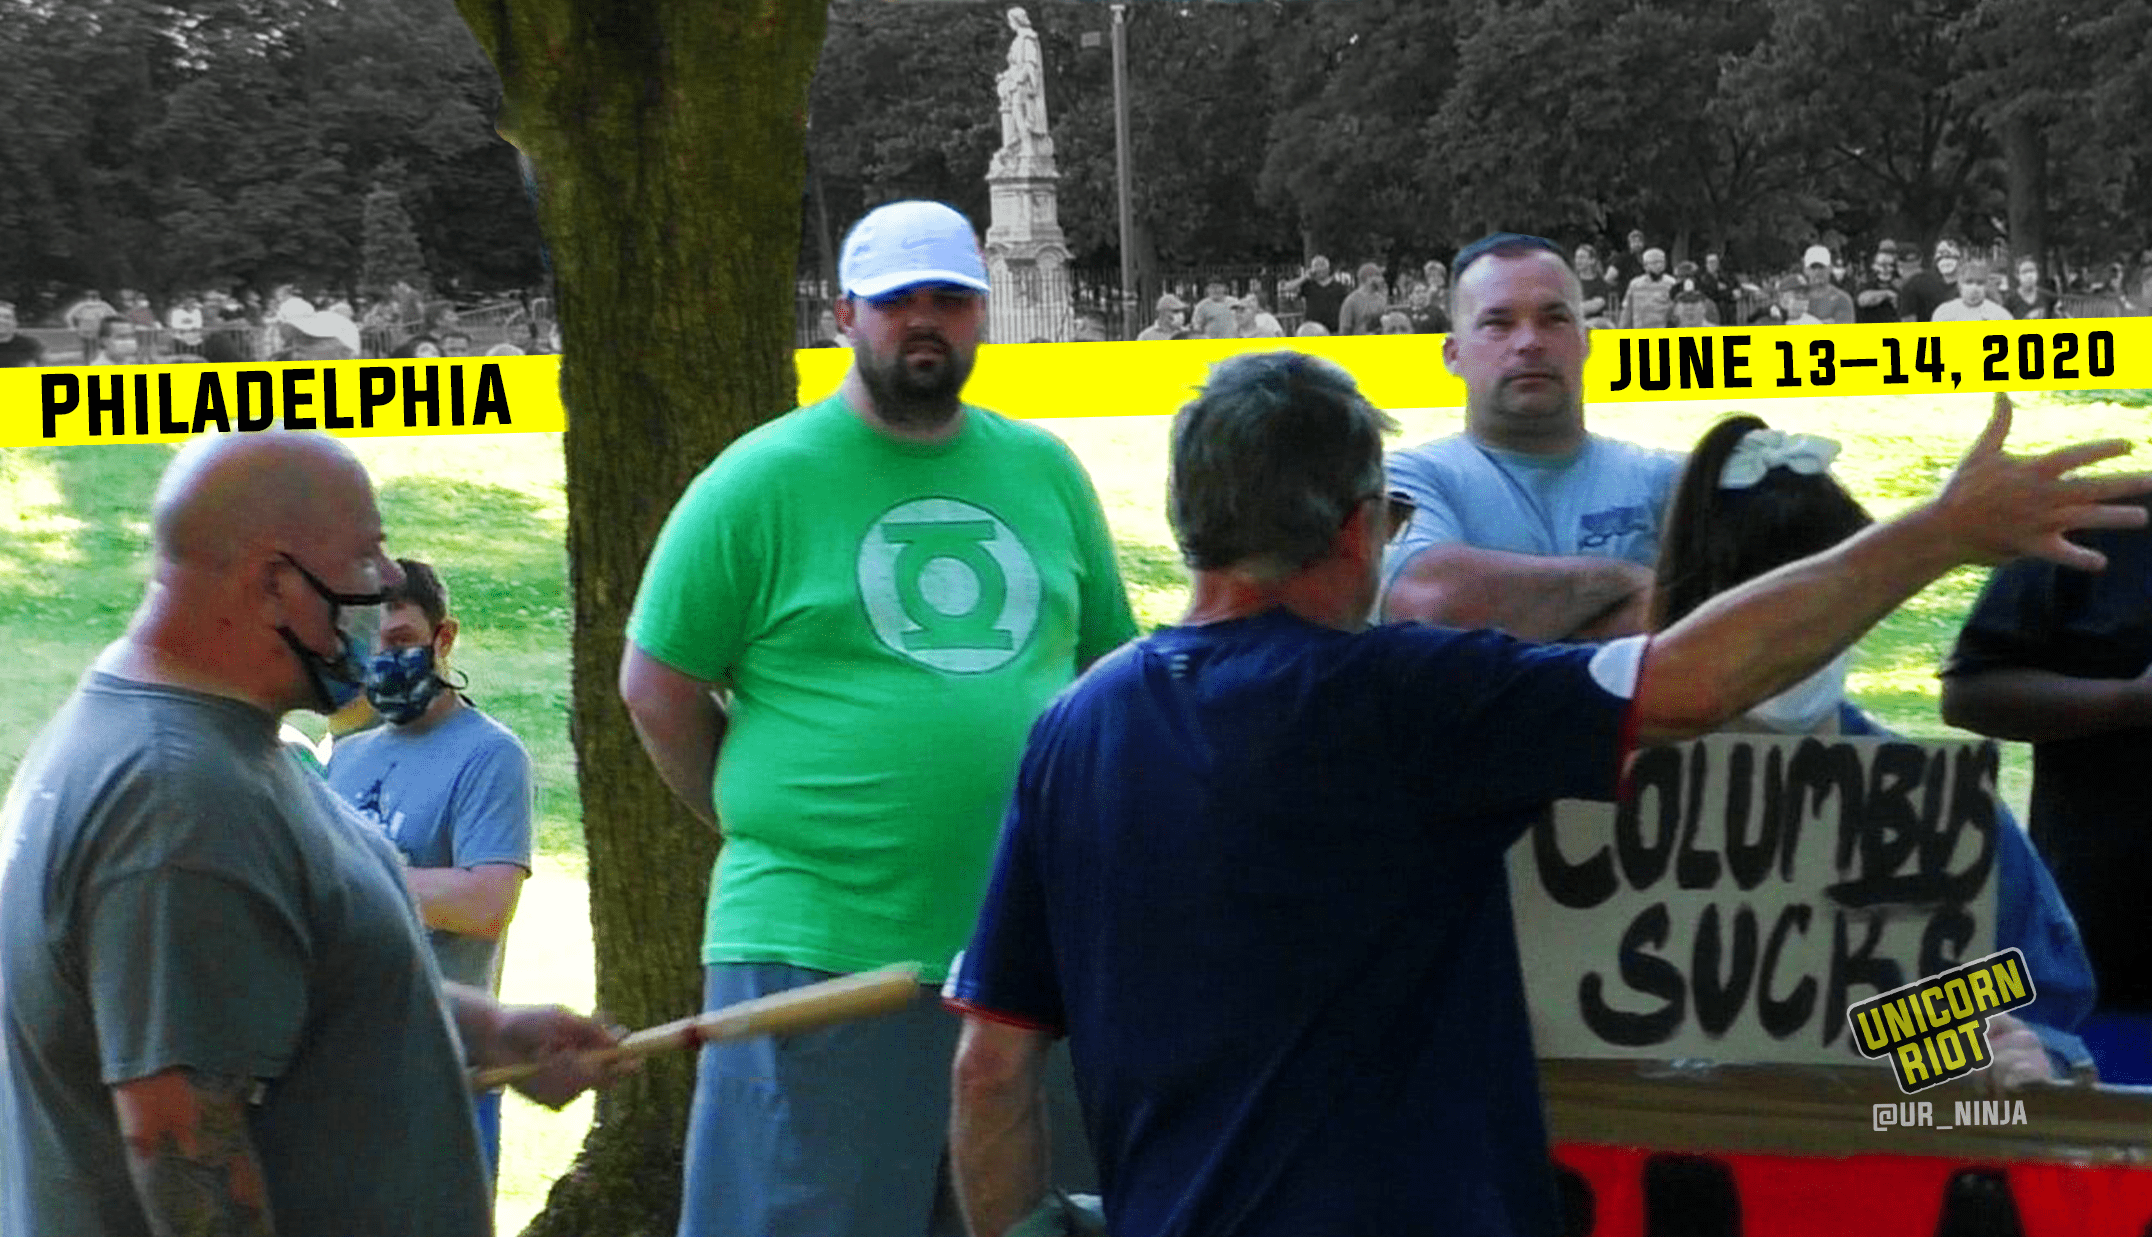 image: South Philly residents confront anti-racist community members, one of whom has a sign "Fuck Columbus." A man is gesturing at her with a bat. Above the scene is a yellow bar with date & location, Philadelphia, June 13 - 14, 2020. In the background as a composite, a crowd is gathered around the Columbus statue in Marconi Plaza in South Philly.